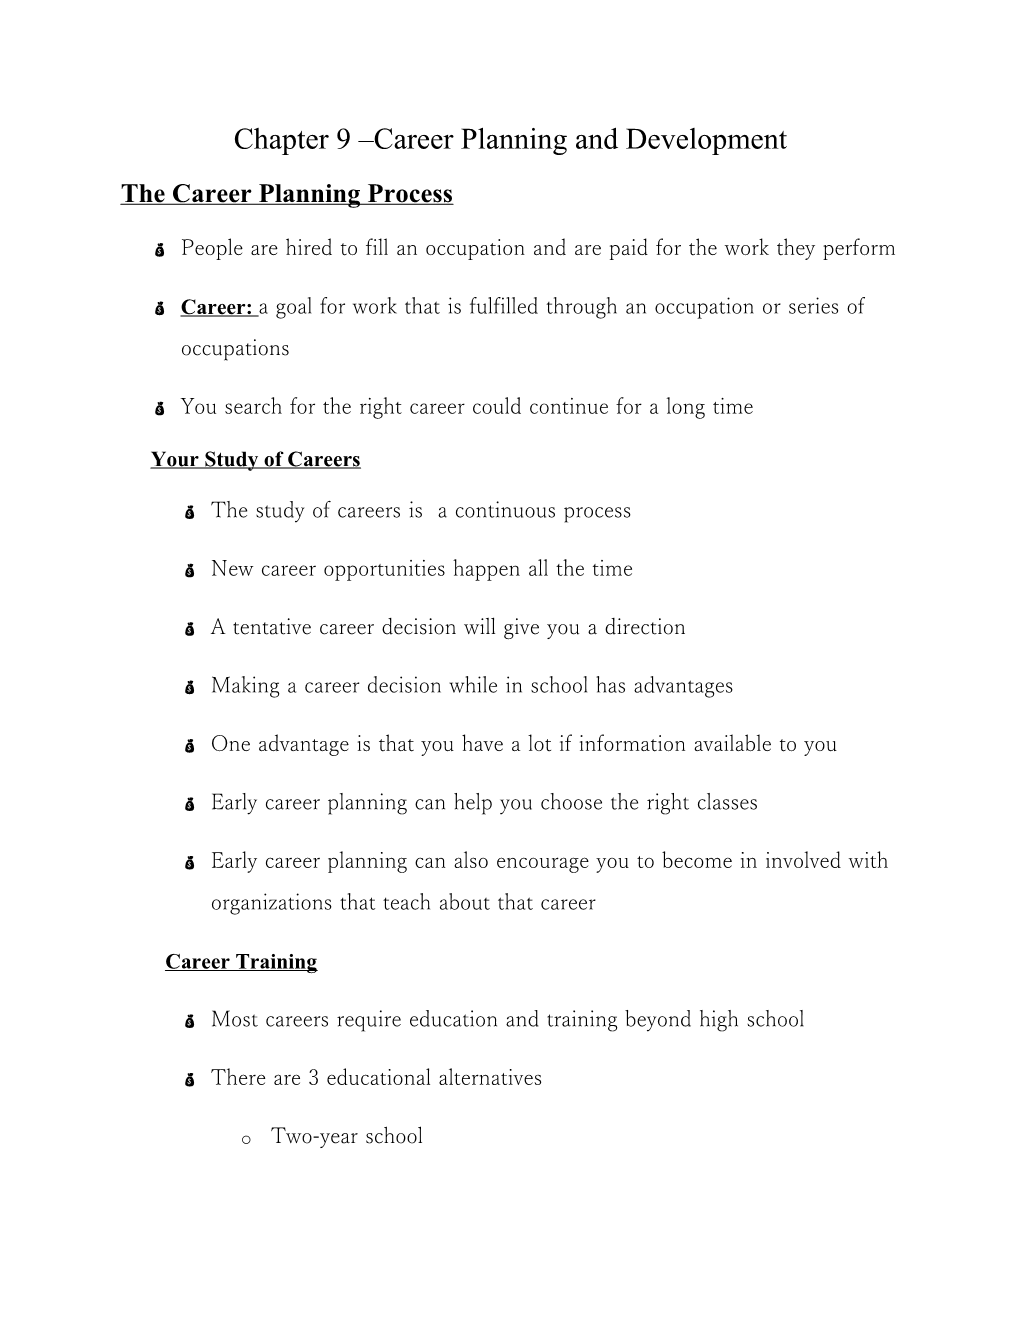 Chapter 9 Career Planning and Development